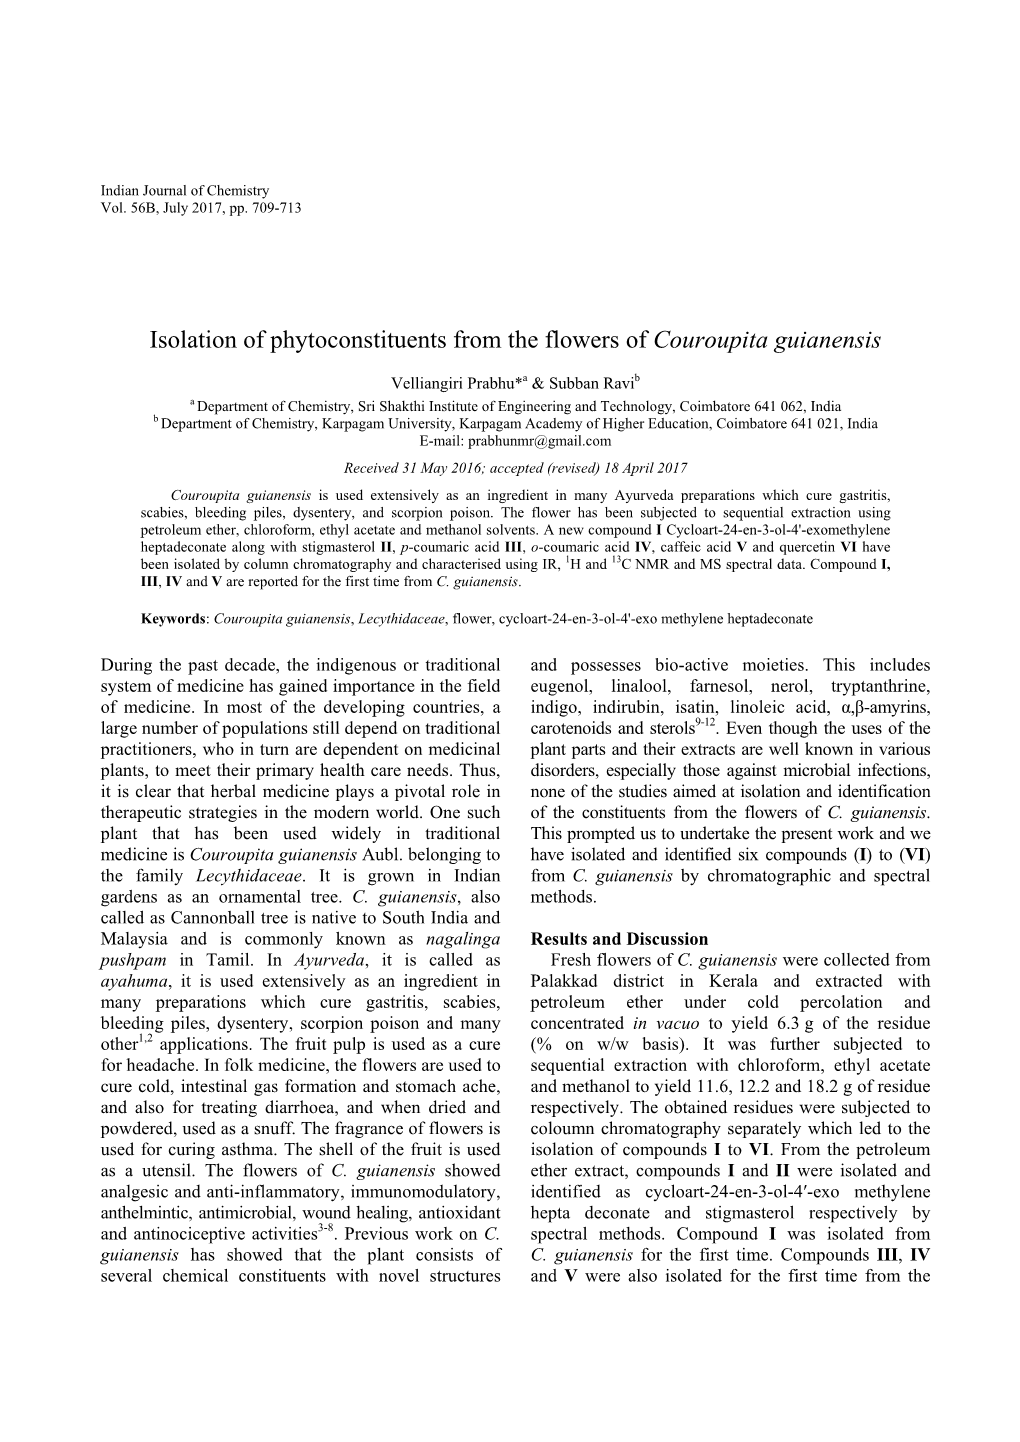 Isolation of Phytoconstituents from the Flowers of Couroupita Guianensis